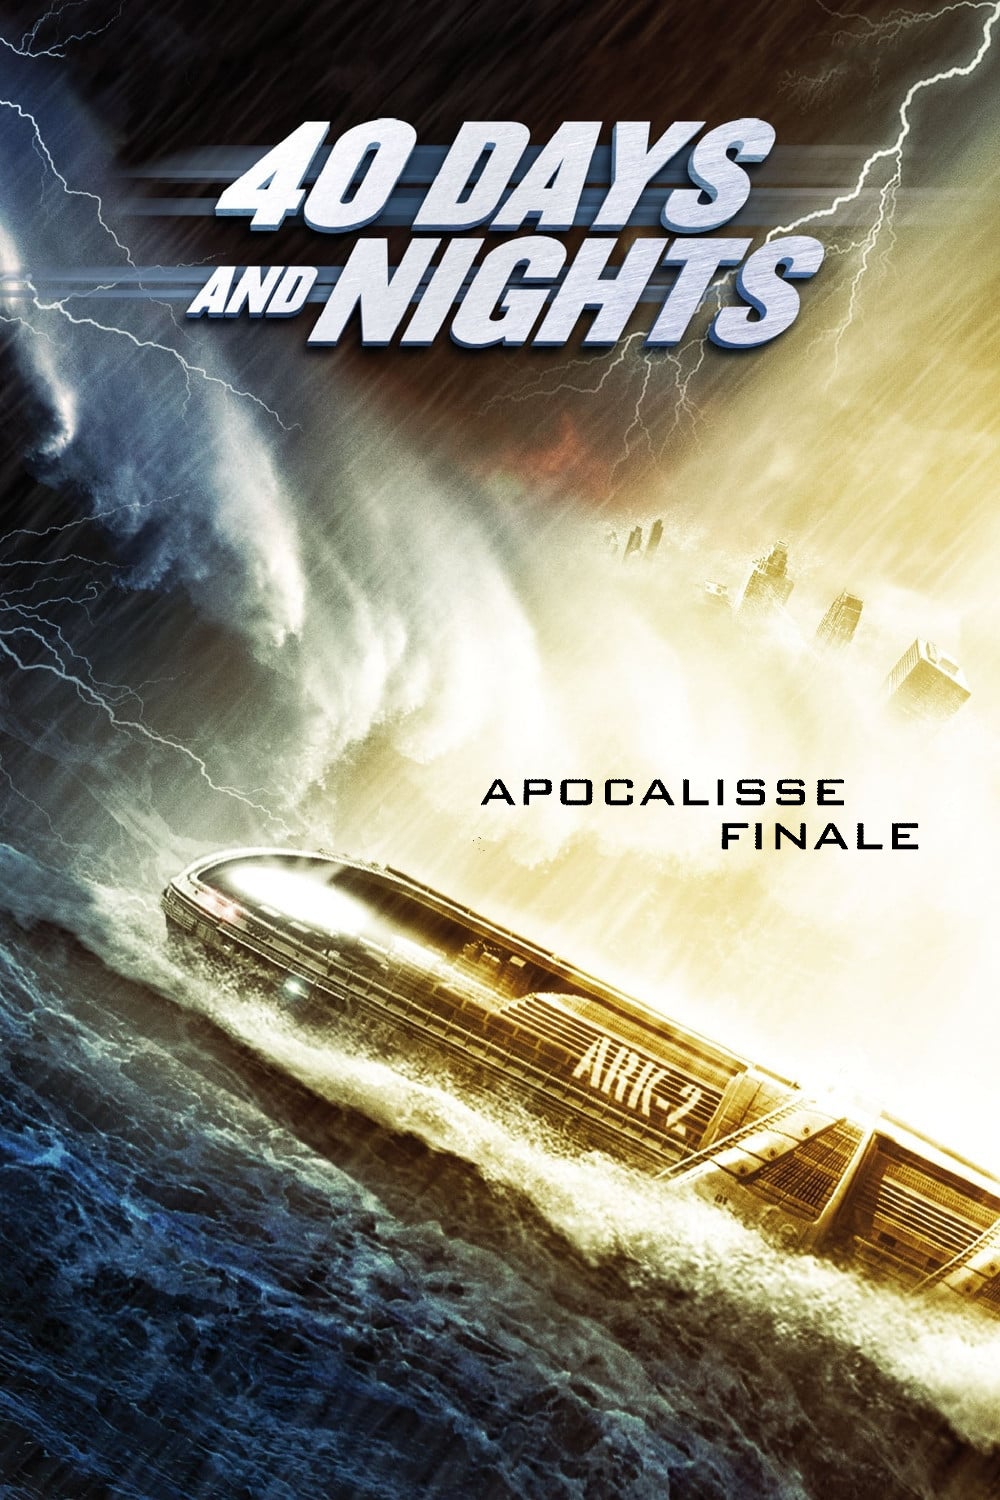 40 Days and night – Apocalisse finale [HD] (2012)